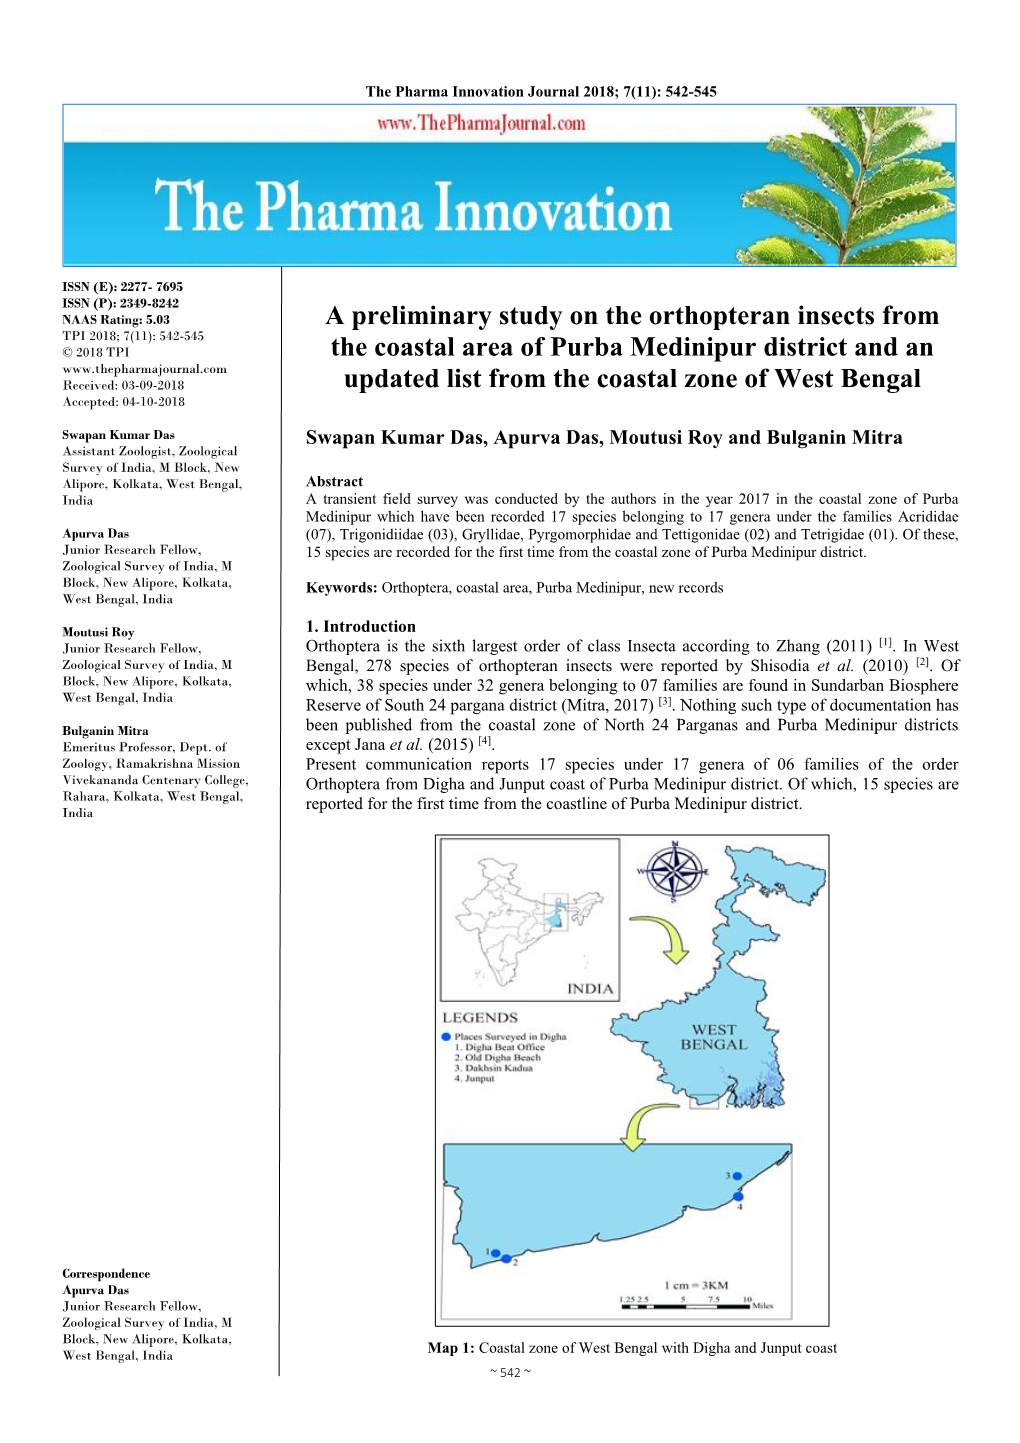 A Preliminary Study on the Orthopteran Insects from the Coastal Area of Purba Medinipur District and an Updated List from the Co